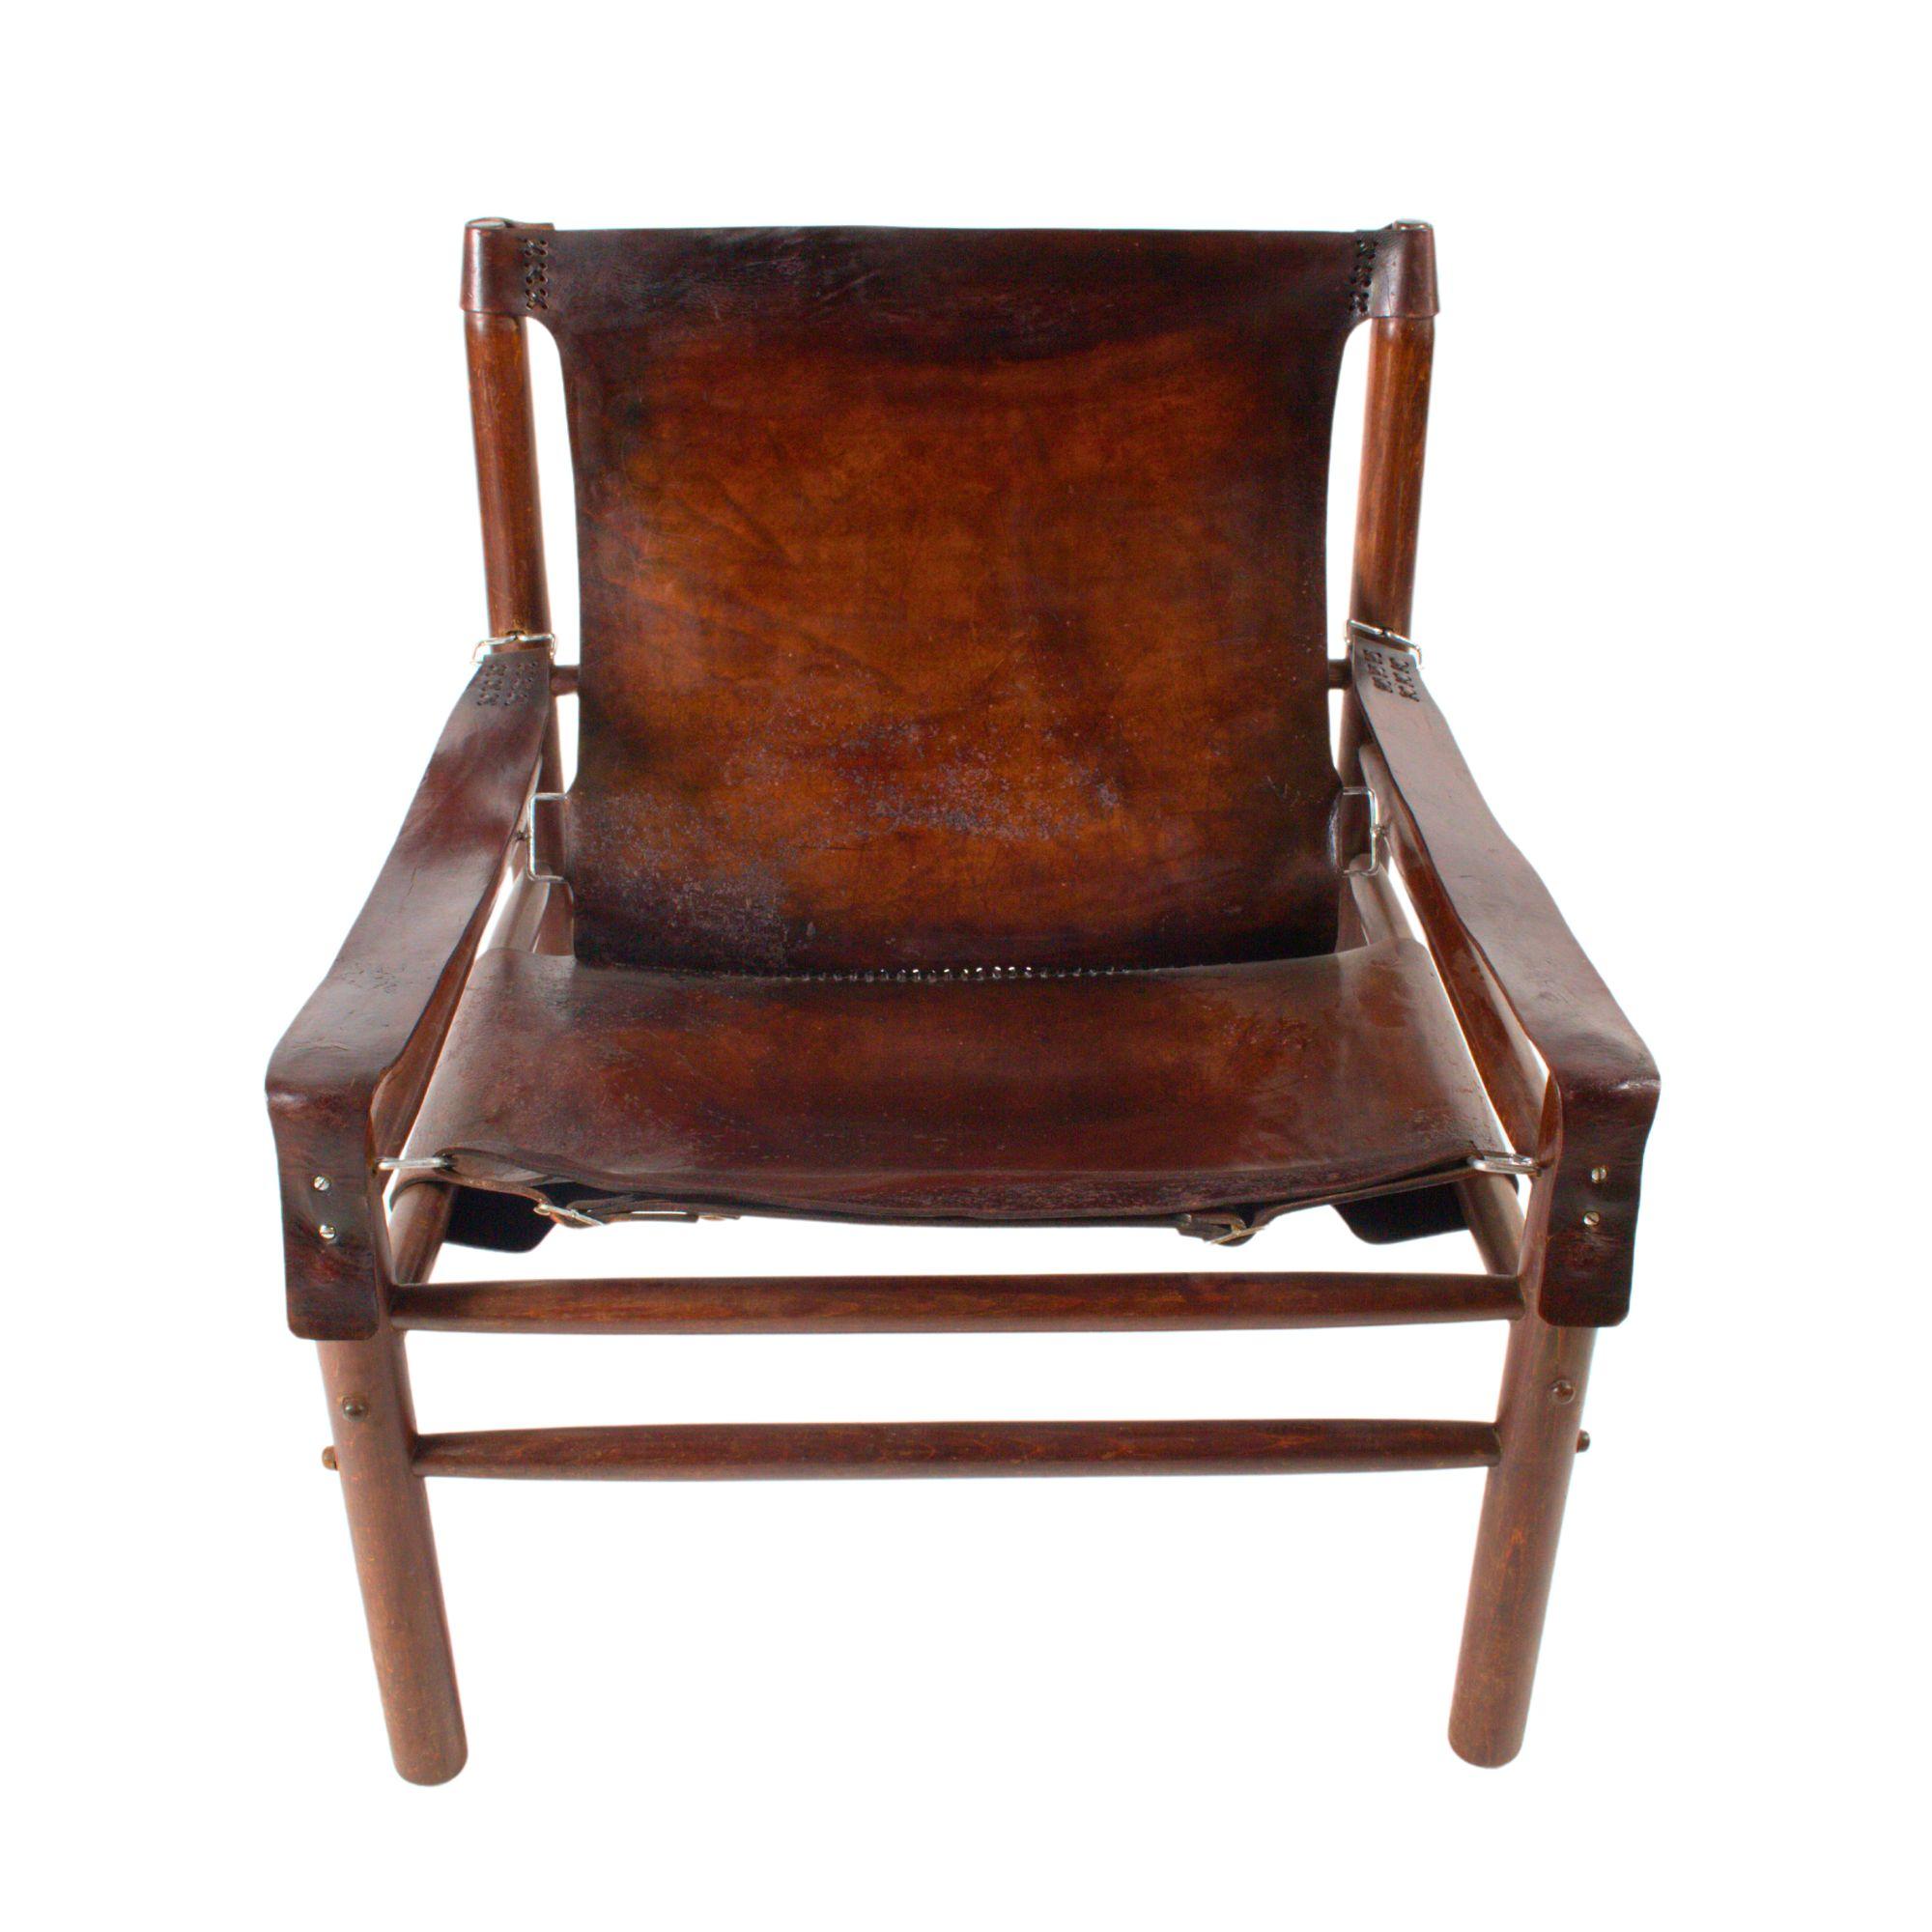 This stylish pair of Safari armchairs from the 1970s exudes timeless charm with its combination of buffalo leather and sturdy beech wood. The leather was recently cleaned, but still has its rich patina; beech wood is in excellent condition.